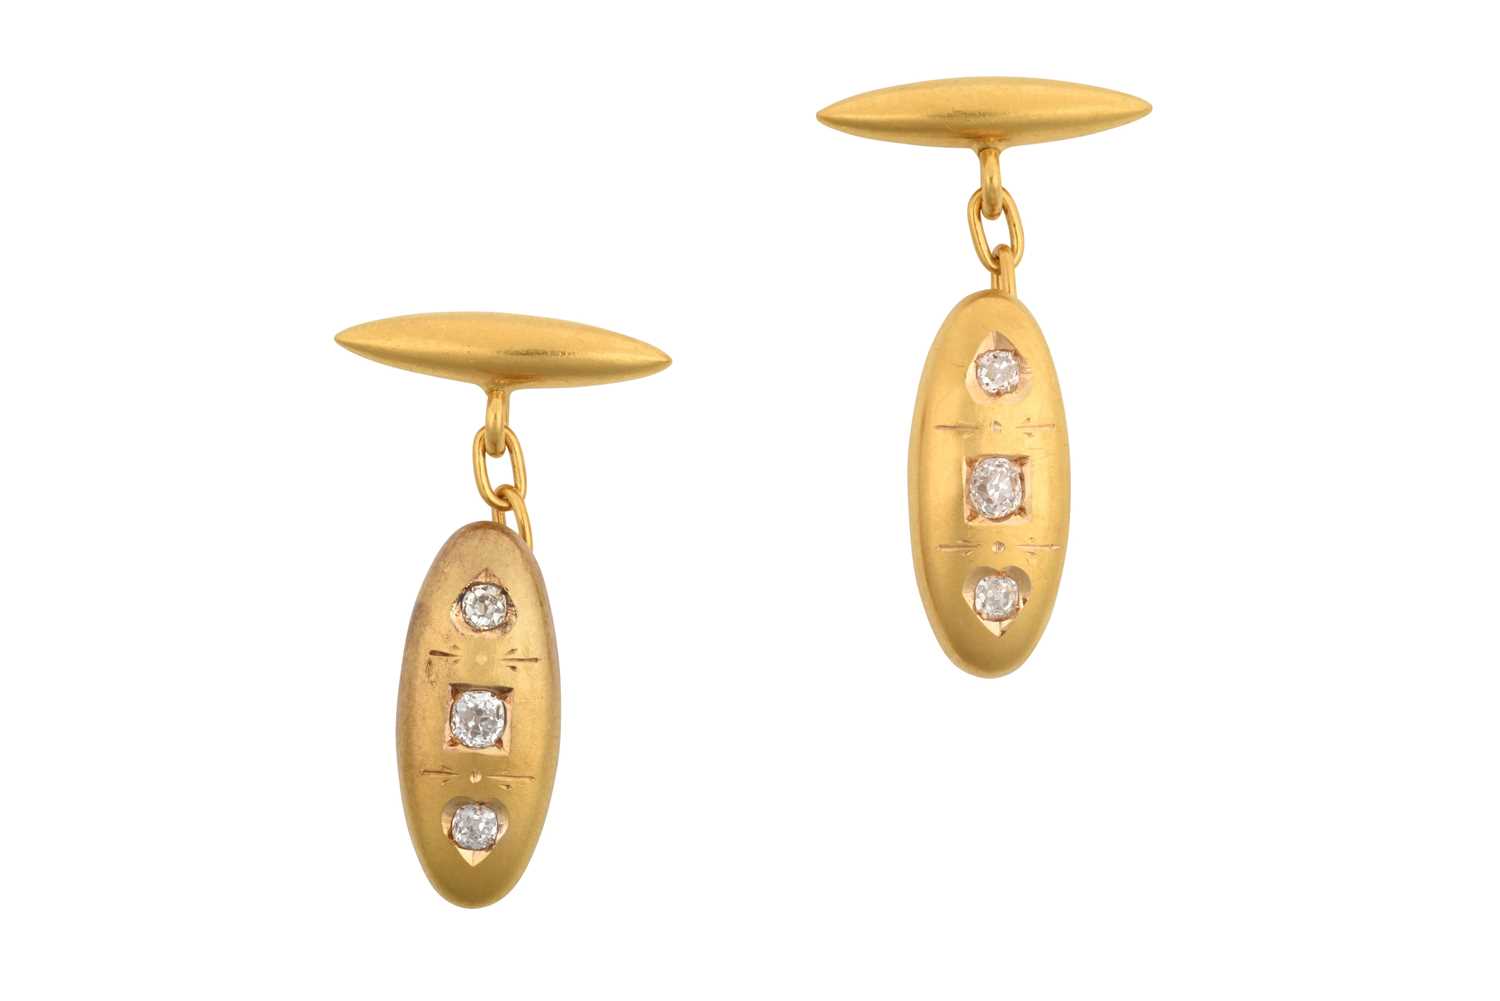 A Pair of Diamond Cufflinks the yellow domed oval plaque inset with three old cut diamonds, chain